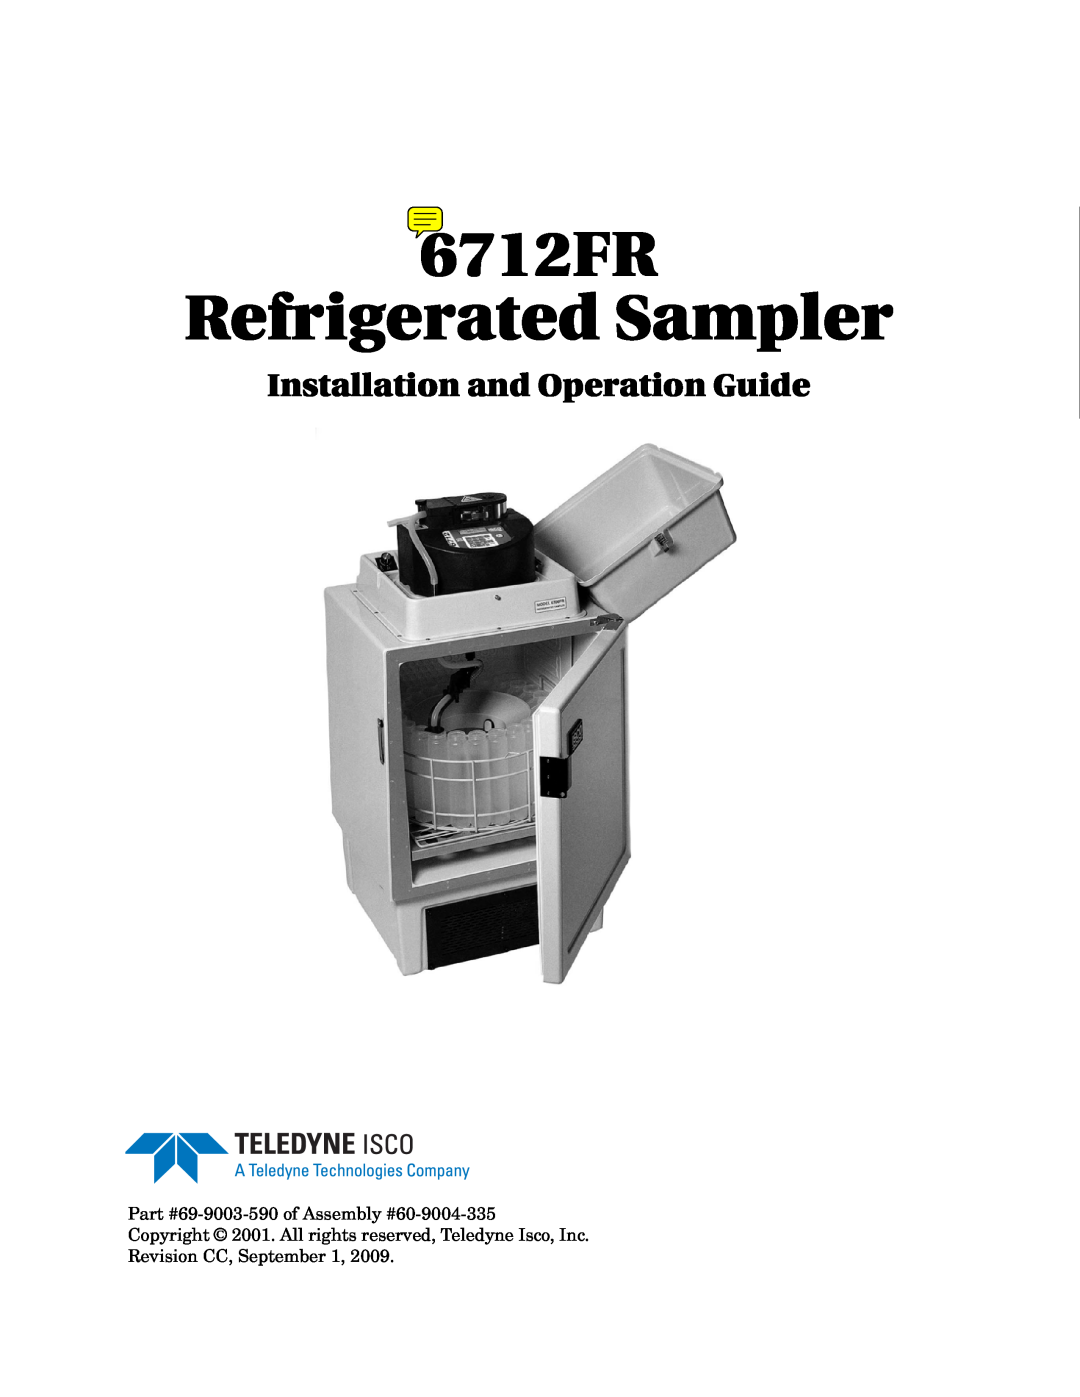 Teledyne manual 6712FR Refrigerated Sampler, Installation and Operation Guide 